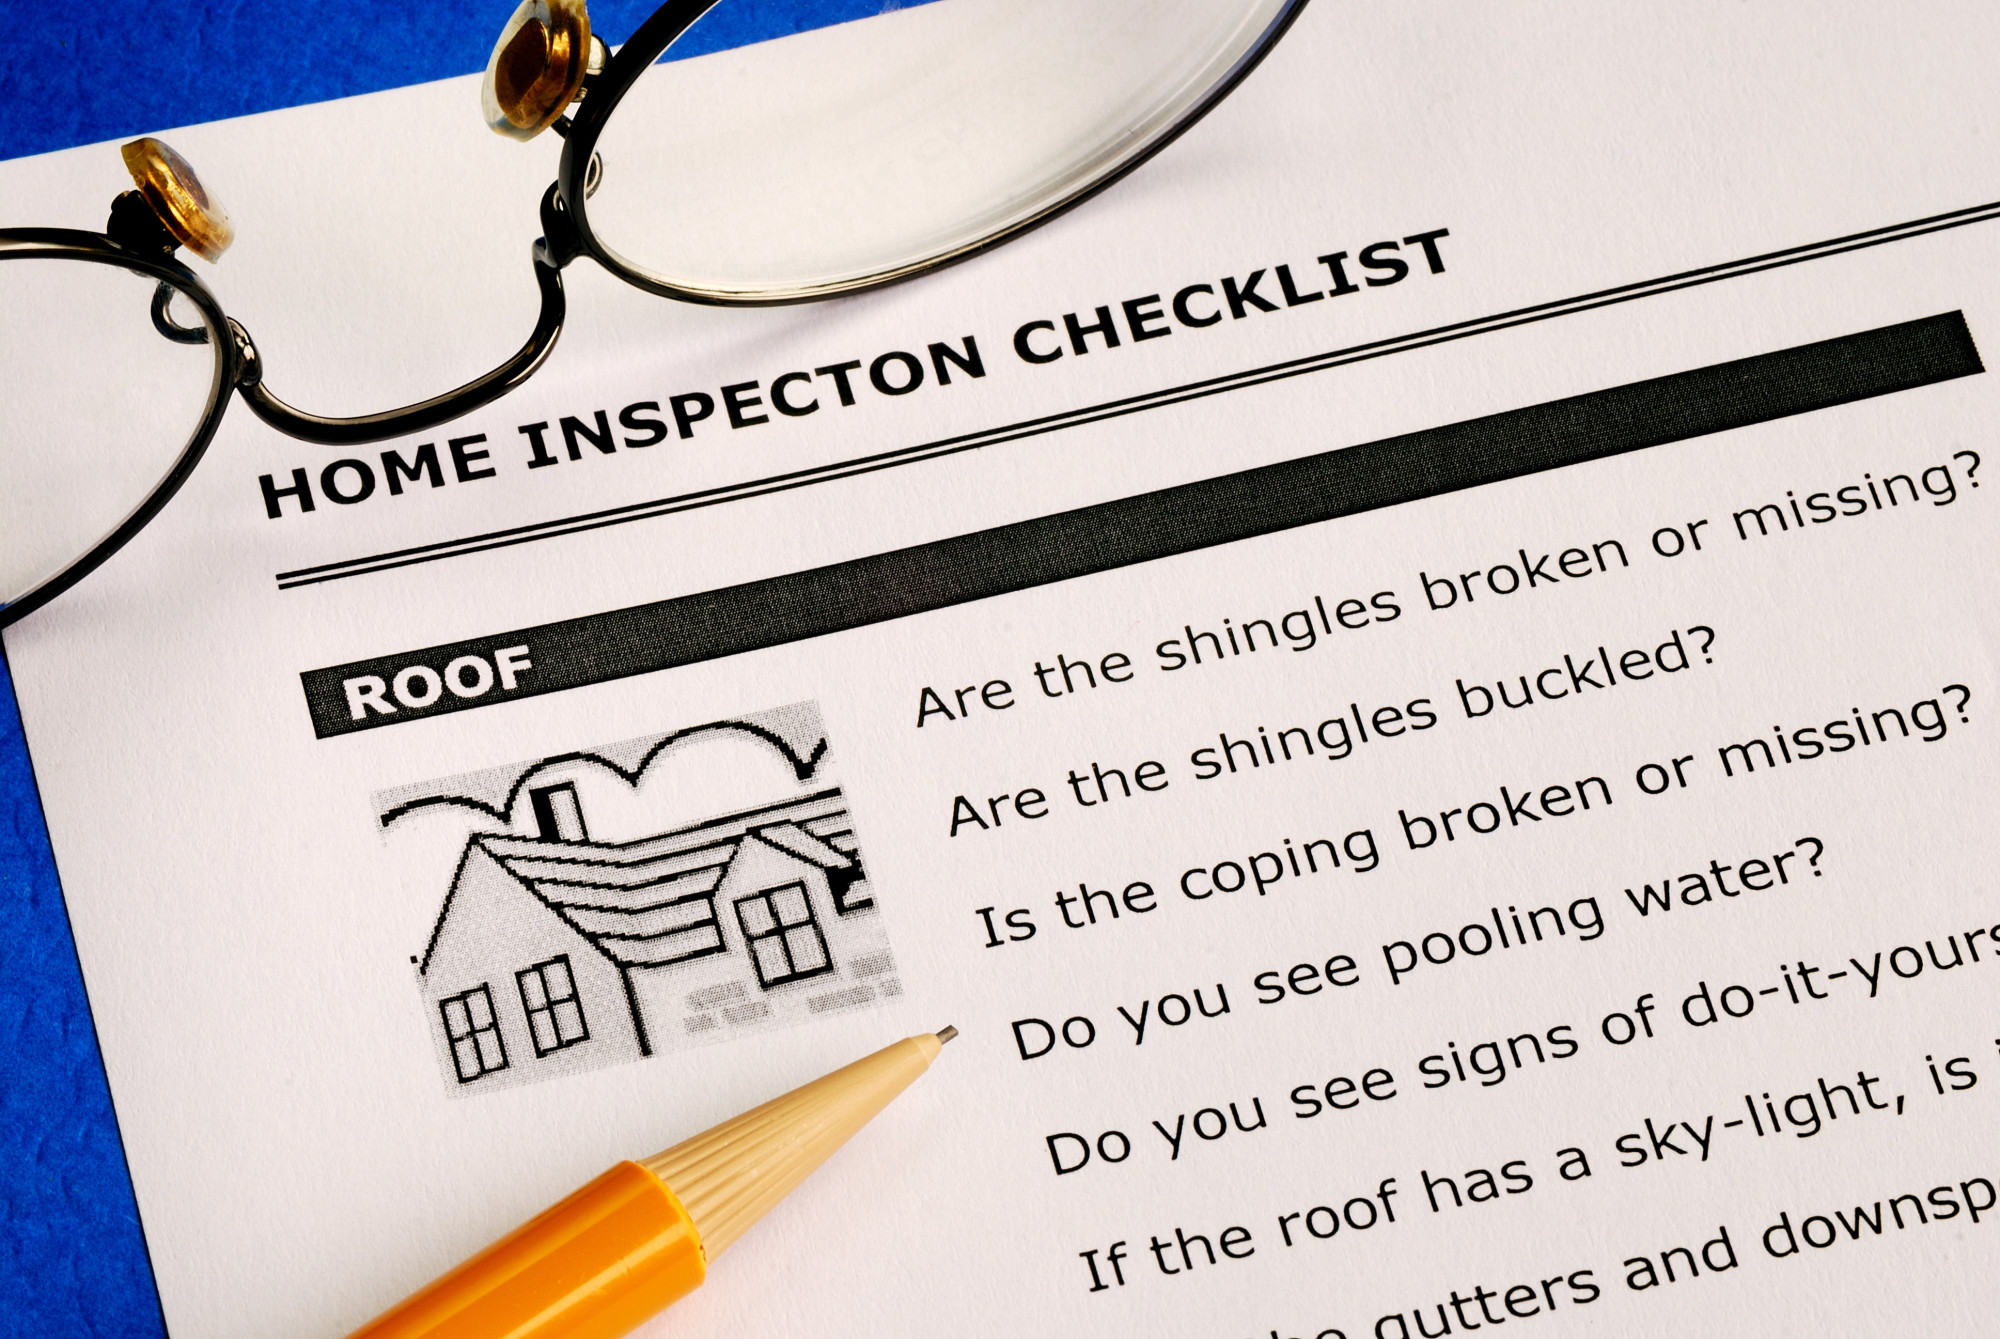 Whether you're a buyer or a seller, this complete home inspection checklist will help you get a good deal on a property. Click here for more info.